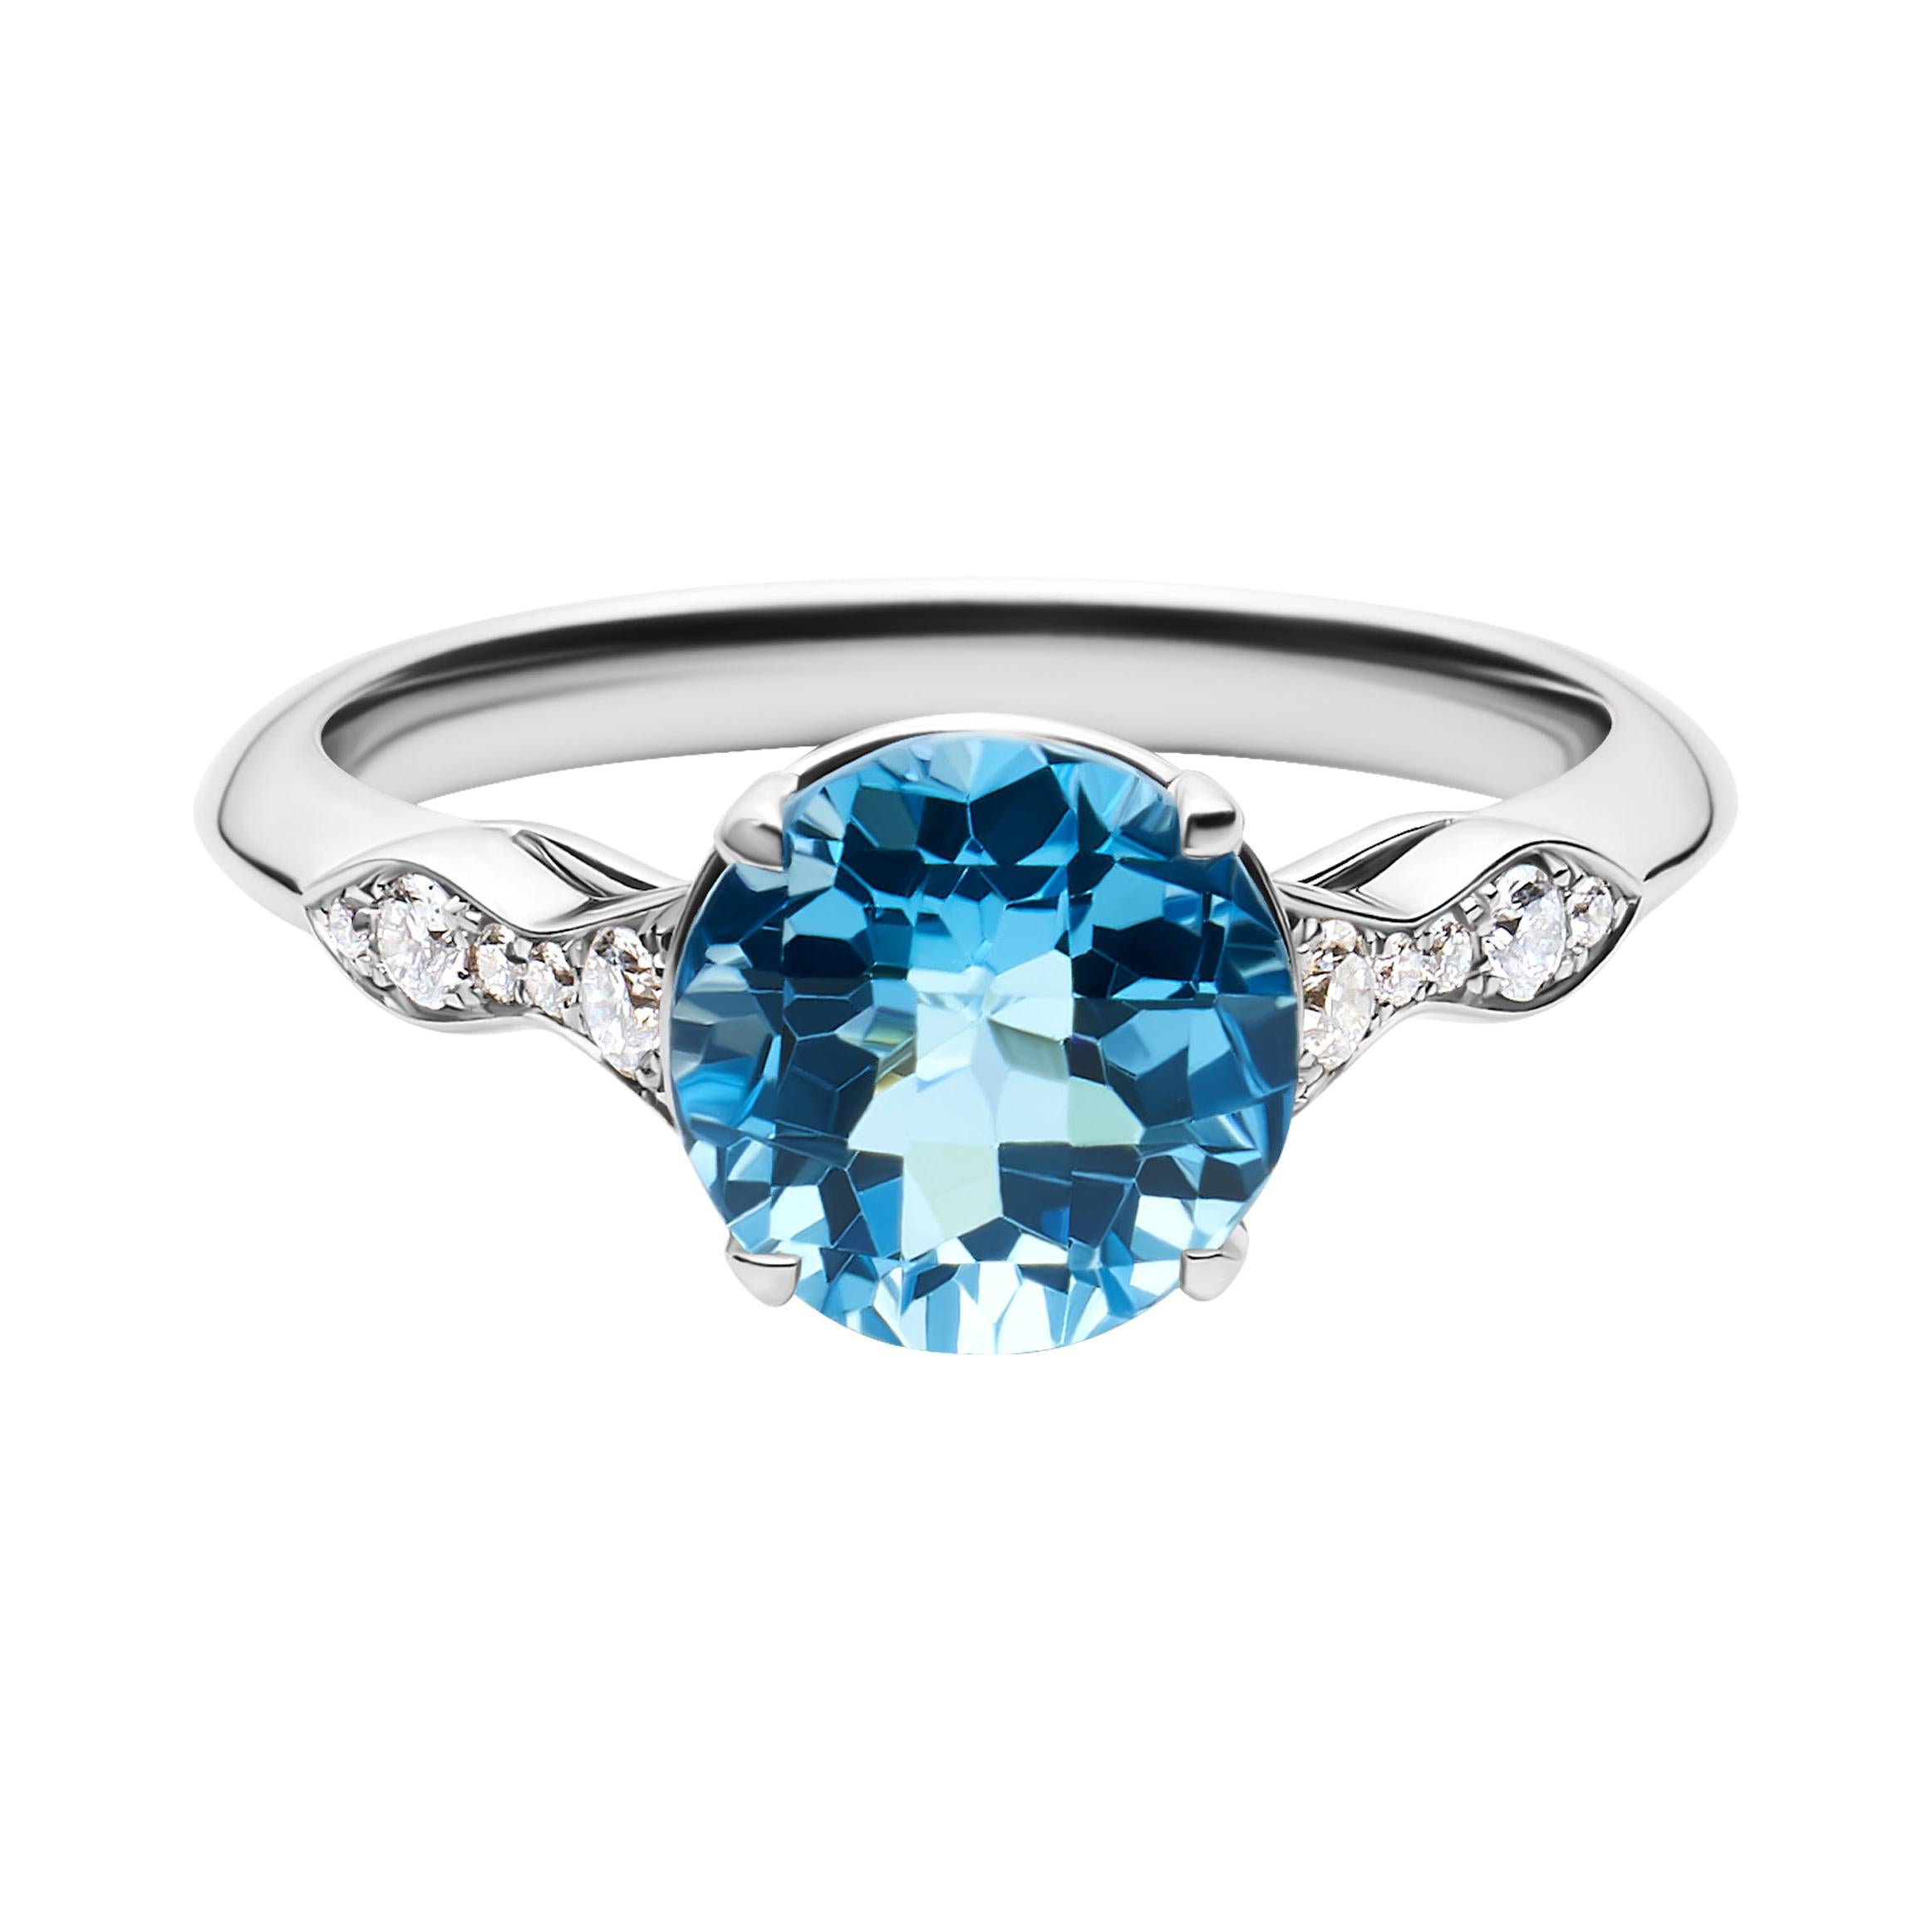 For Sale:  14k White Gold Diamond Engagement Ring with 2.36 Carat Round Blue Topaz